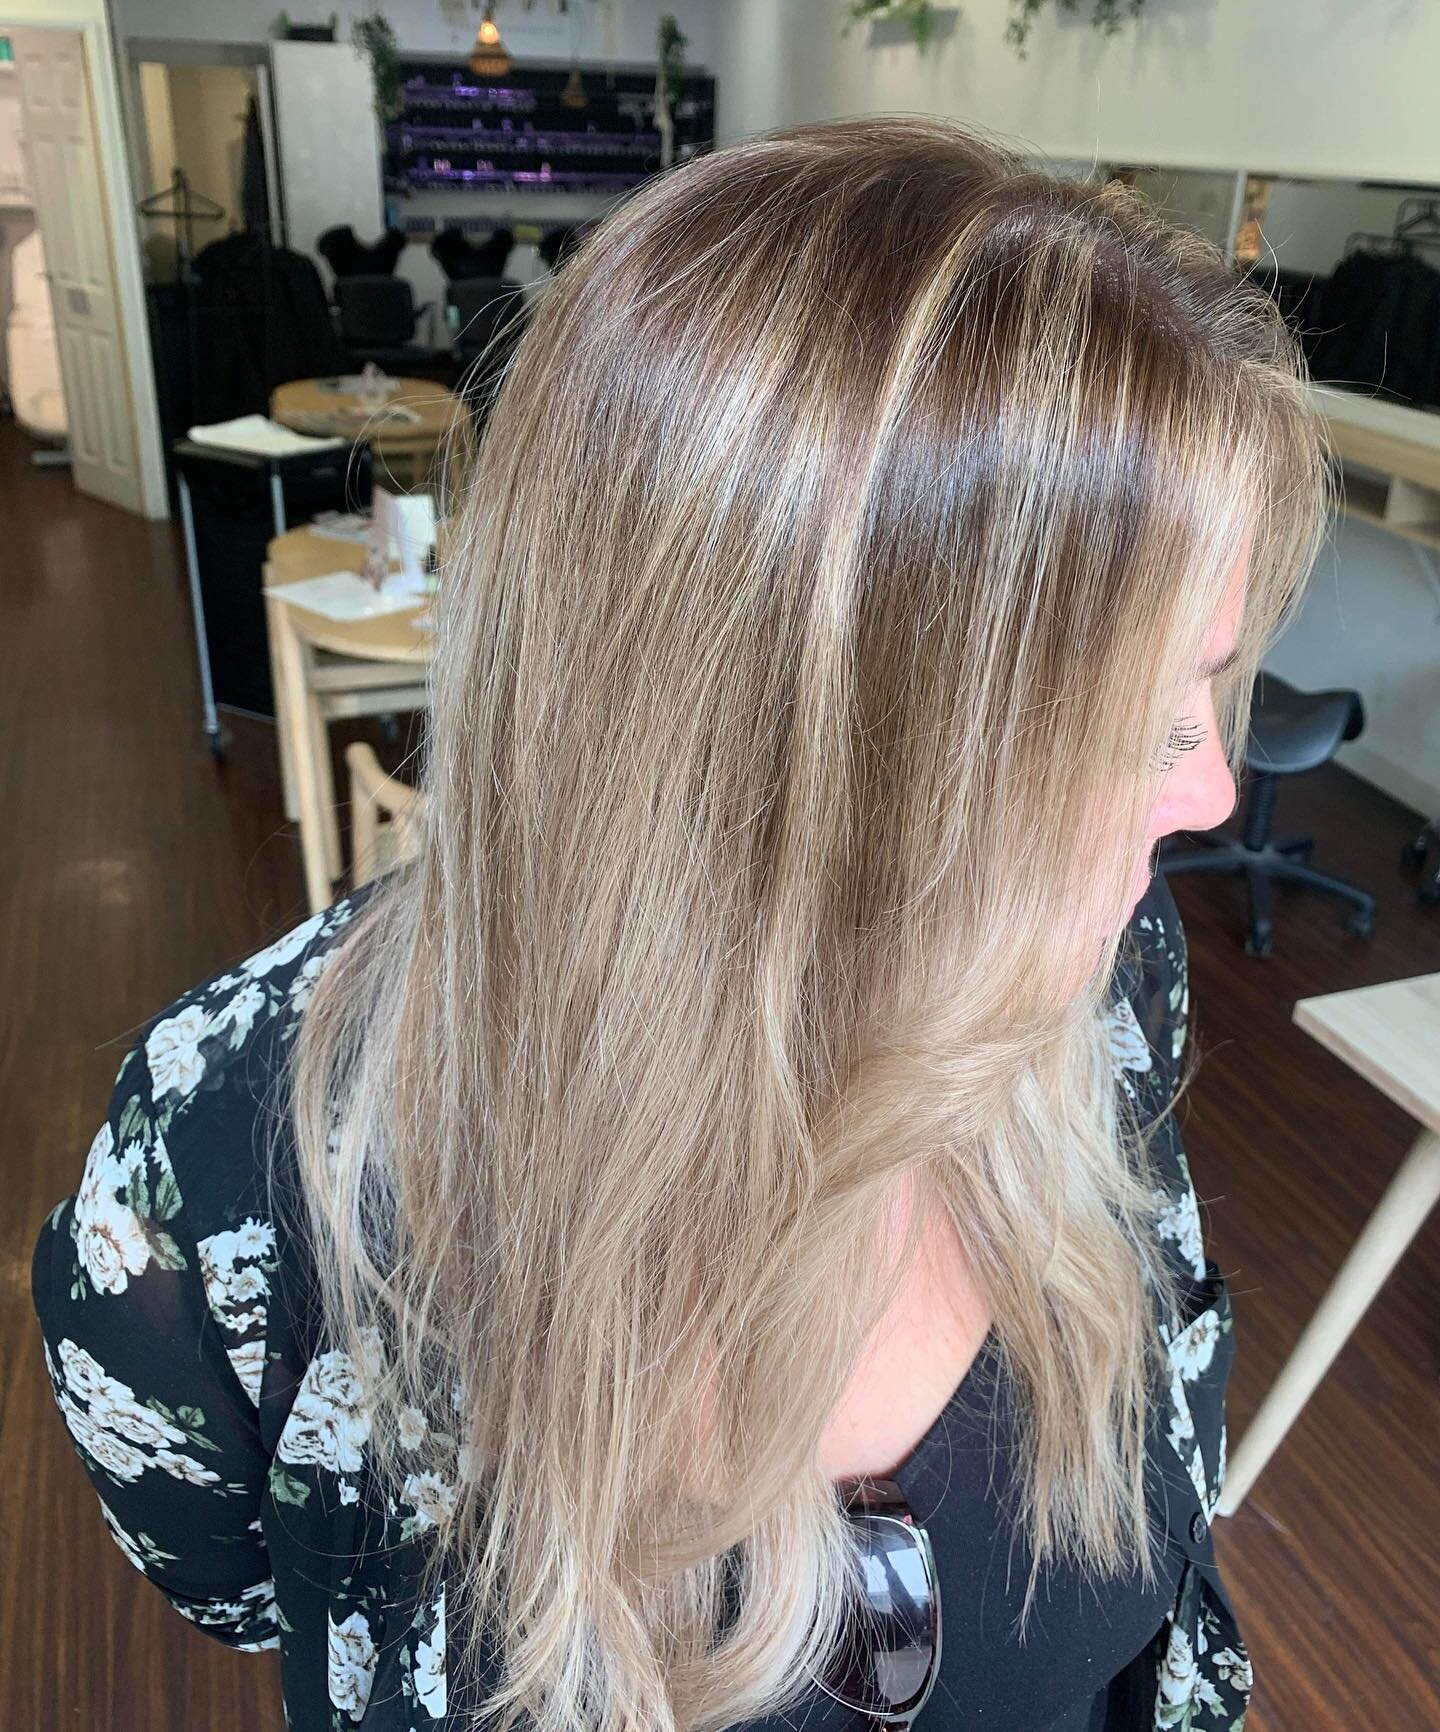 FOILAYAGE- BY @sarahenvymyhair  Scattered balayage foils with a large root smudge . 9gv glaze was used all over to tone.  #foilayage #foliayagehighlights #balayagehighlights